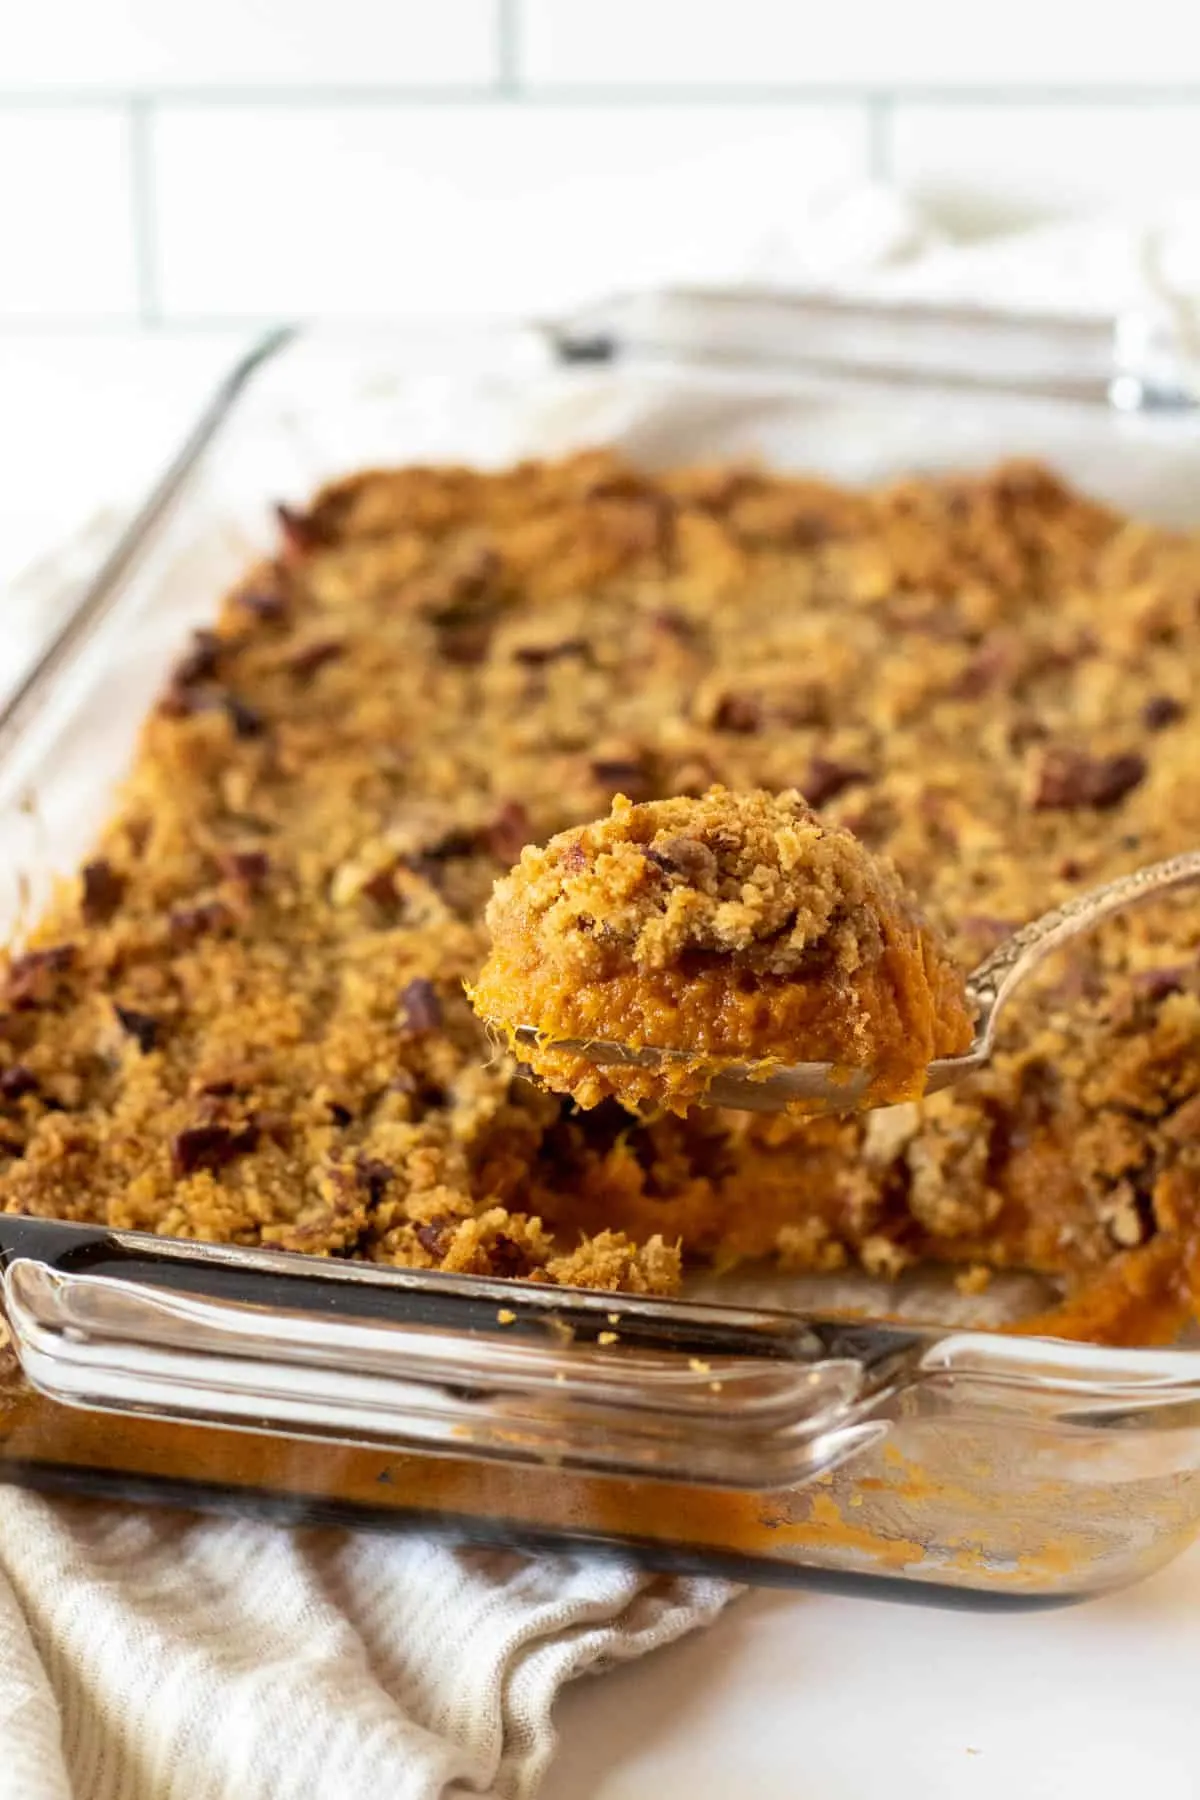 Baked sweet potato casserole with spoonful coming out of baking dish.